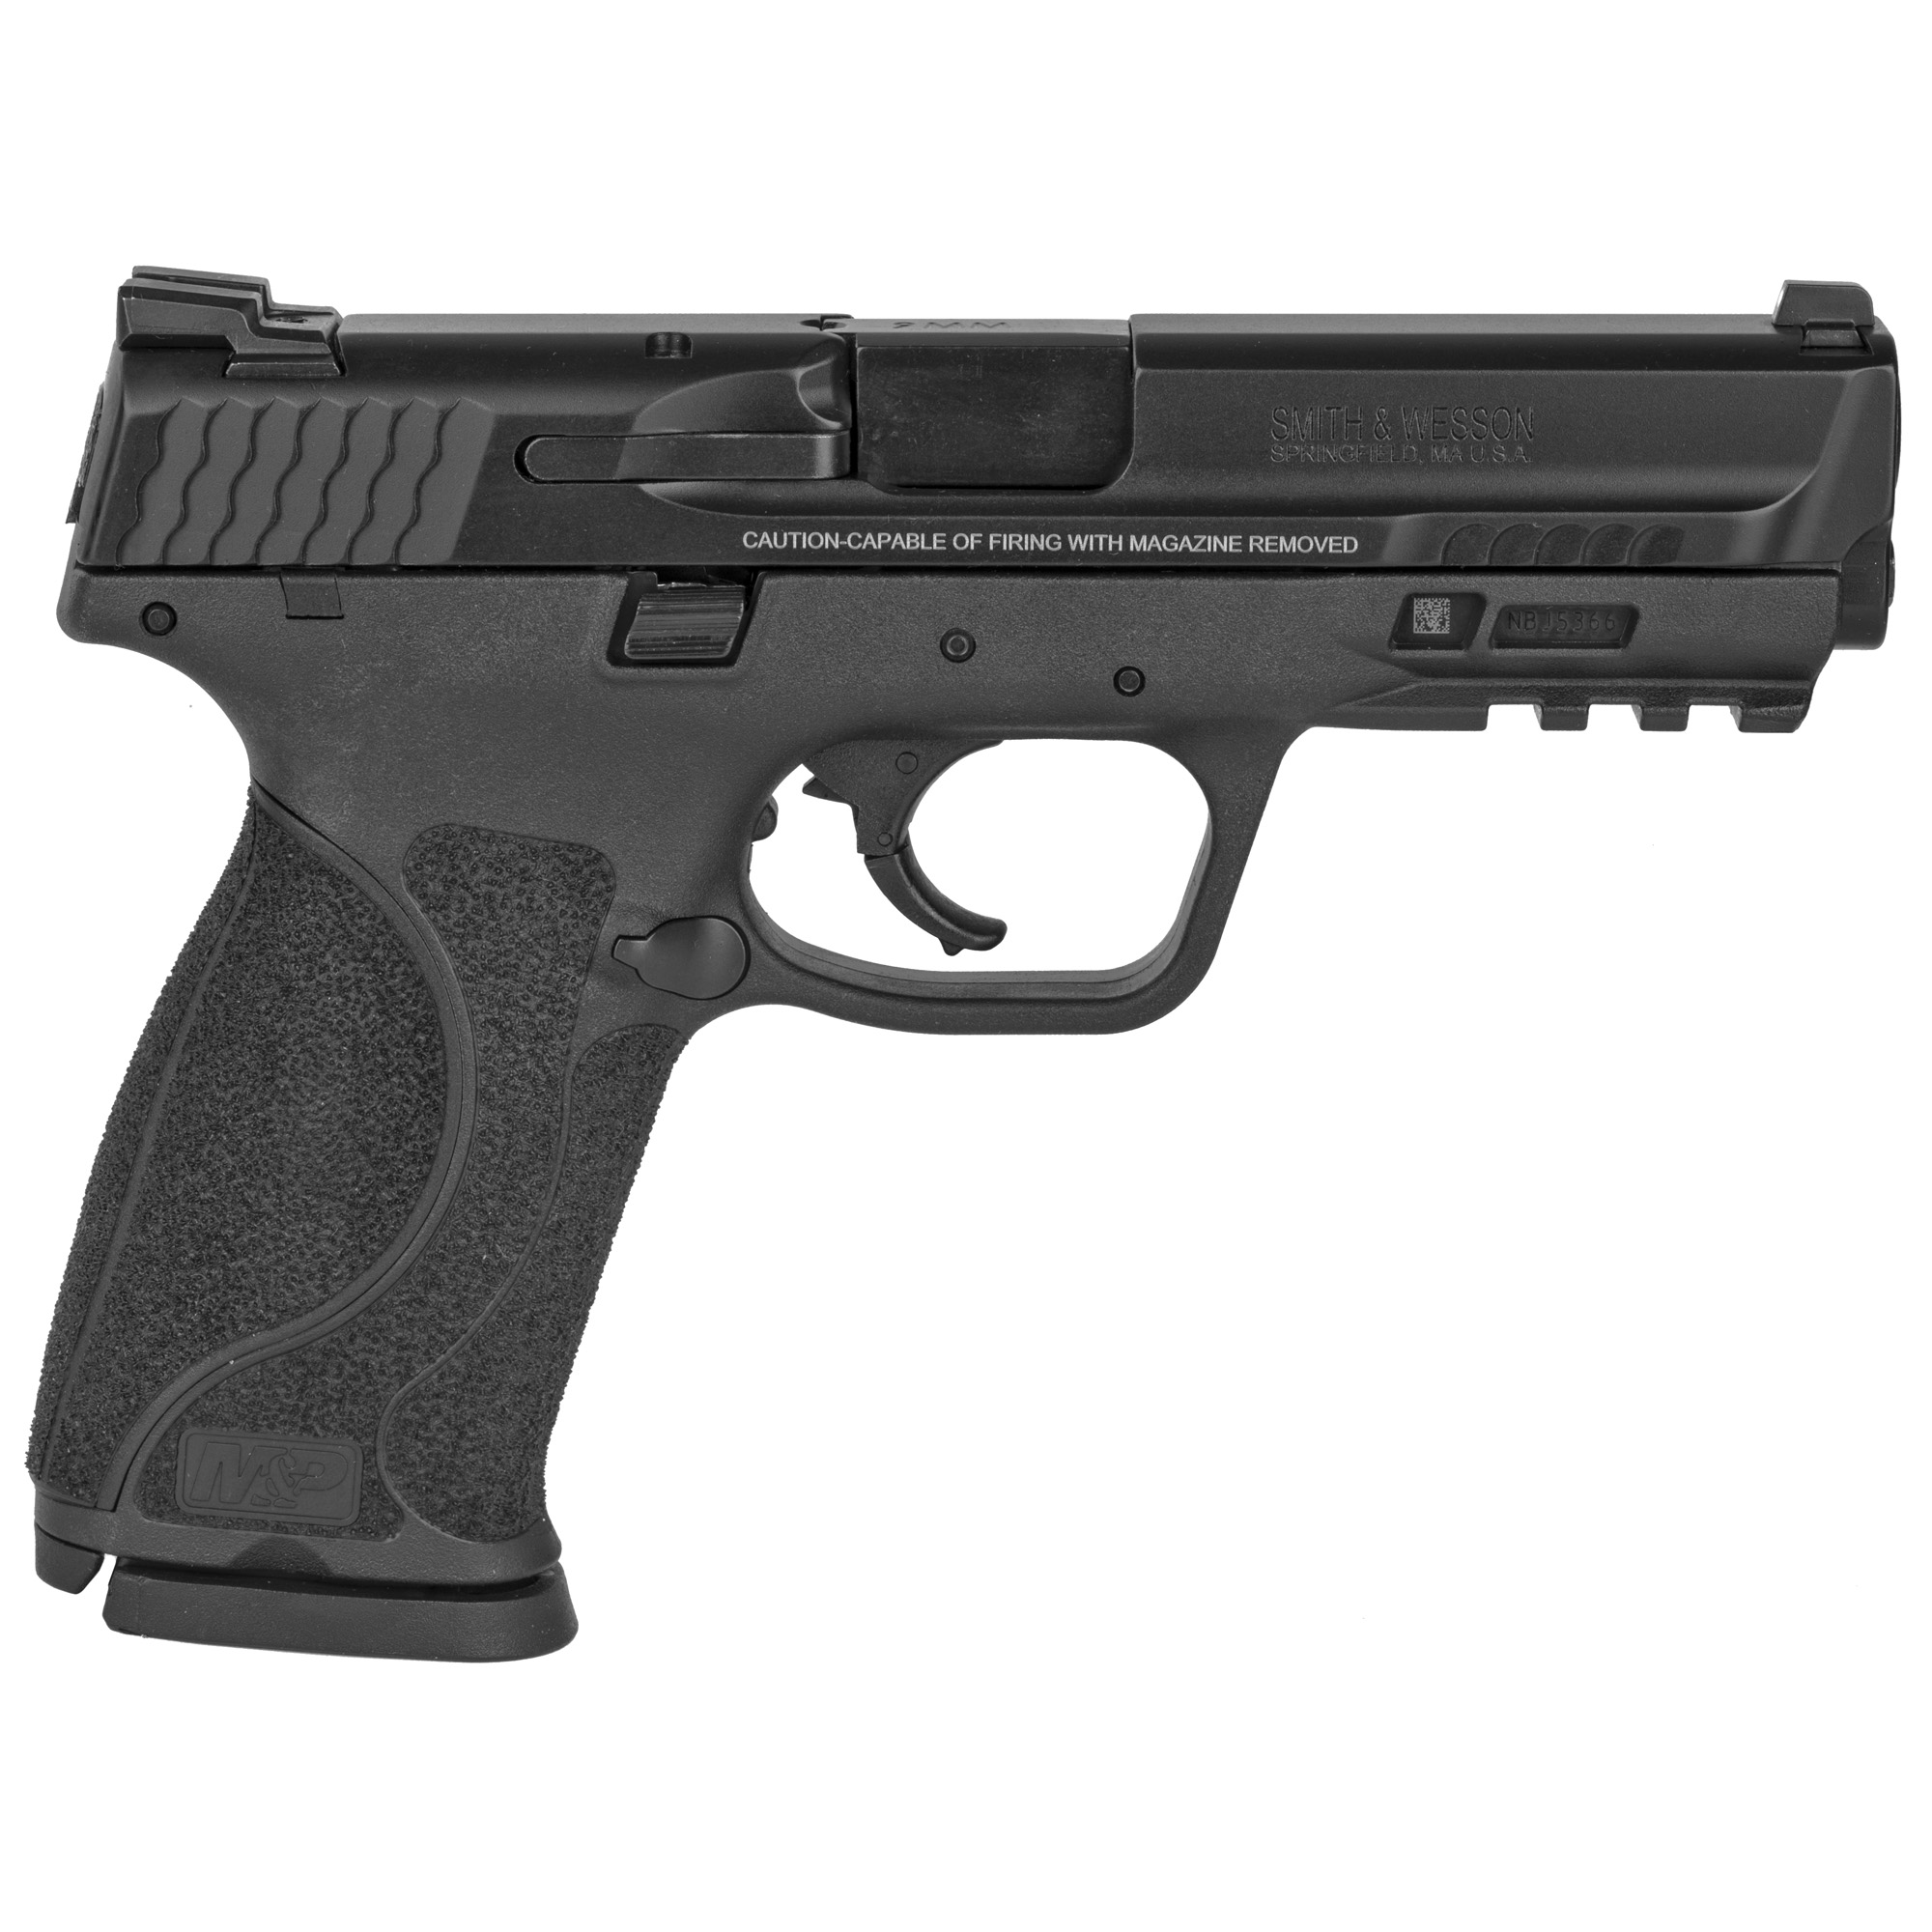 Smith & Wesson, M&P 2.0, Striker Fired, Semi-automatic, Polymer Frame Pistol, Full Size, 9MM, 4.25" Barrel, Armornite Finish, Black, Fixed Sights, No Magazine Safety, 17 Rounds, 2 Magazines